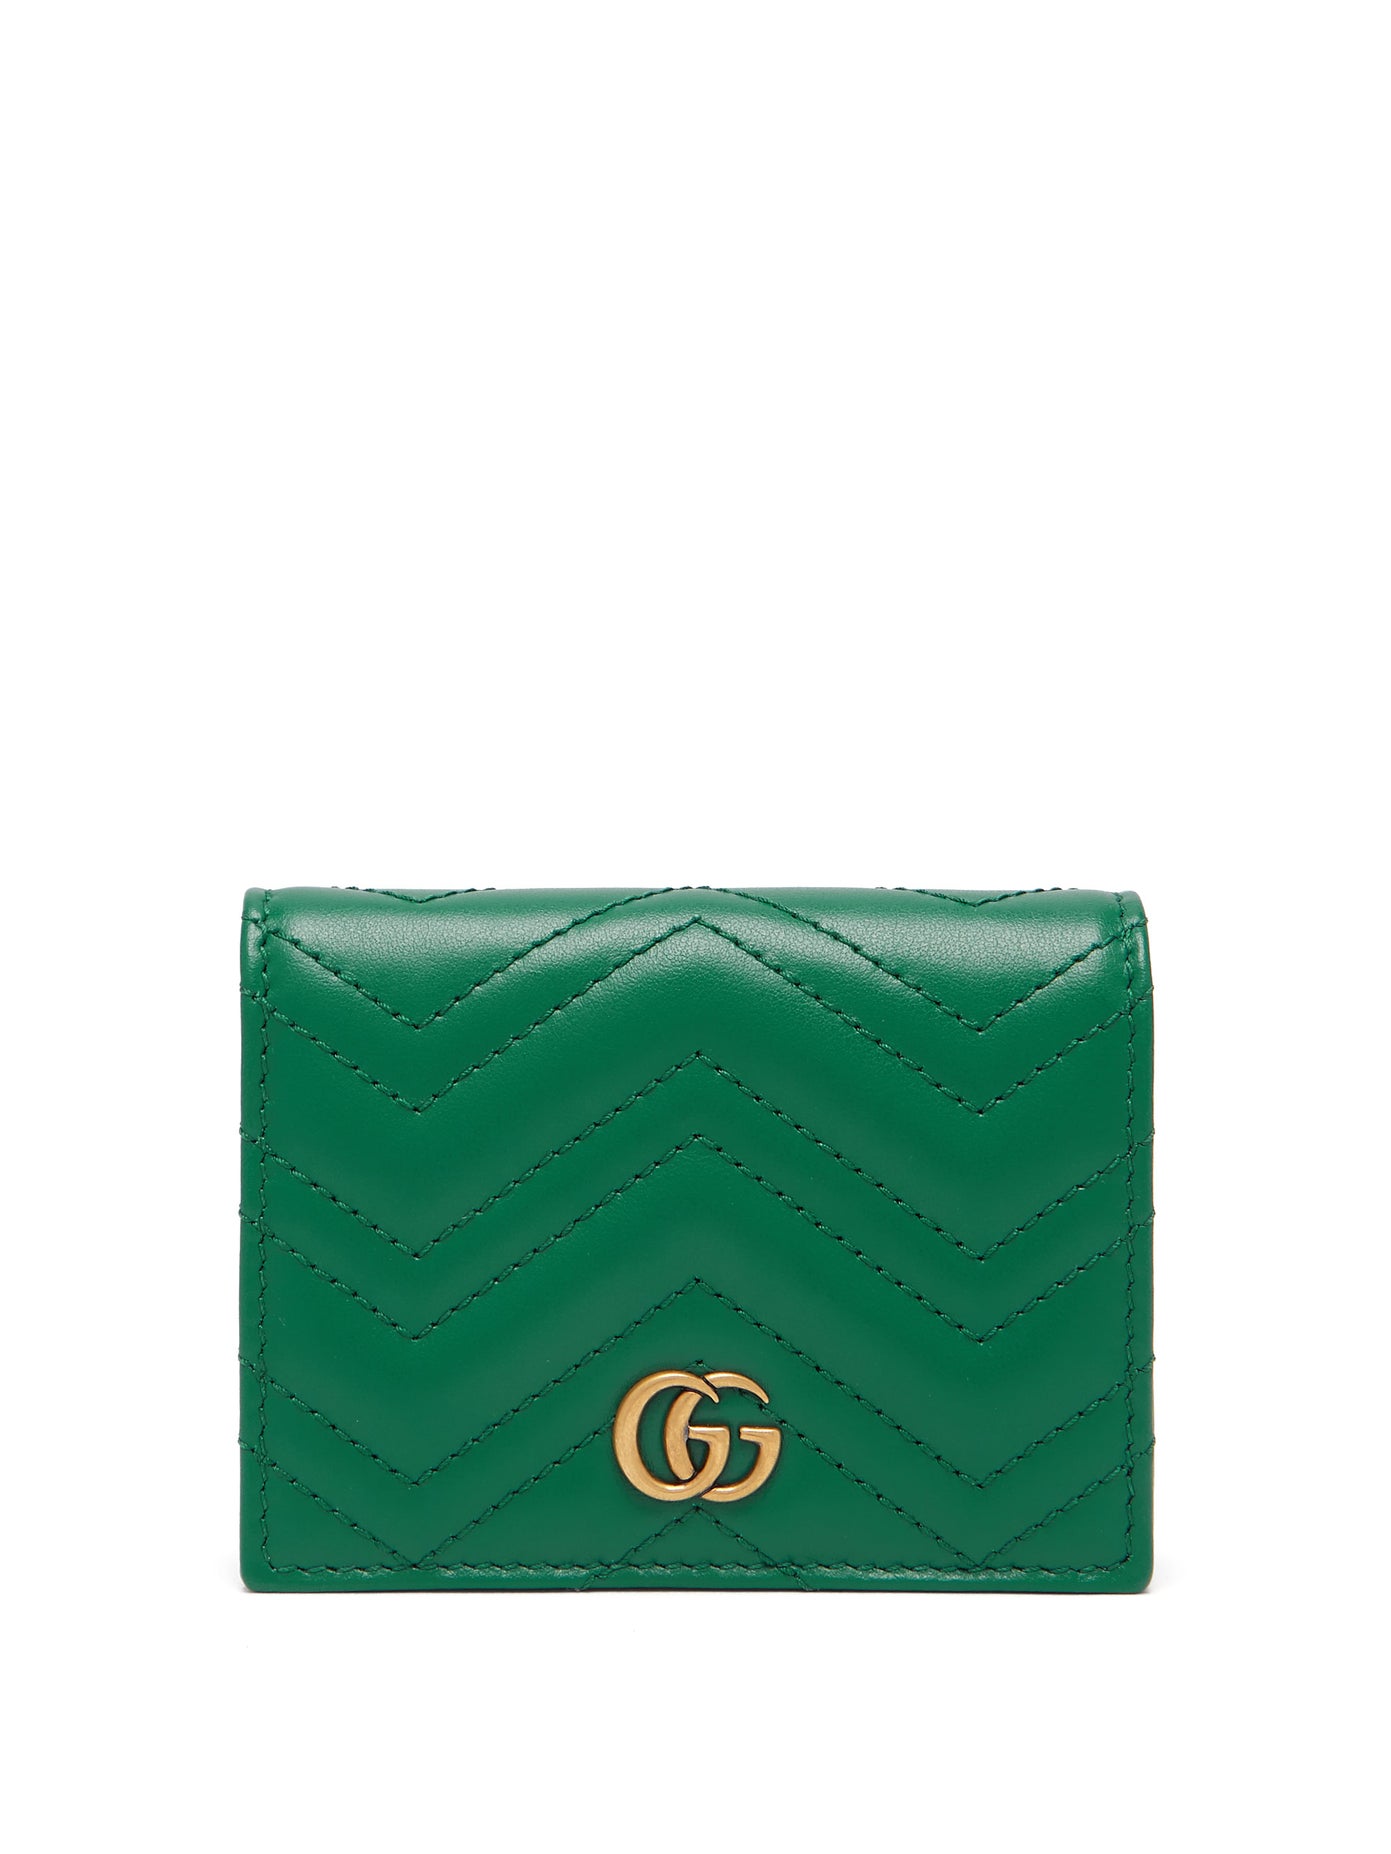 Gucci - Gg Marmont Quilted-Leather Wallet | FASHION STYLE FAN